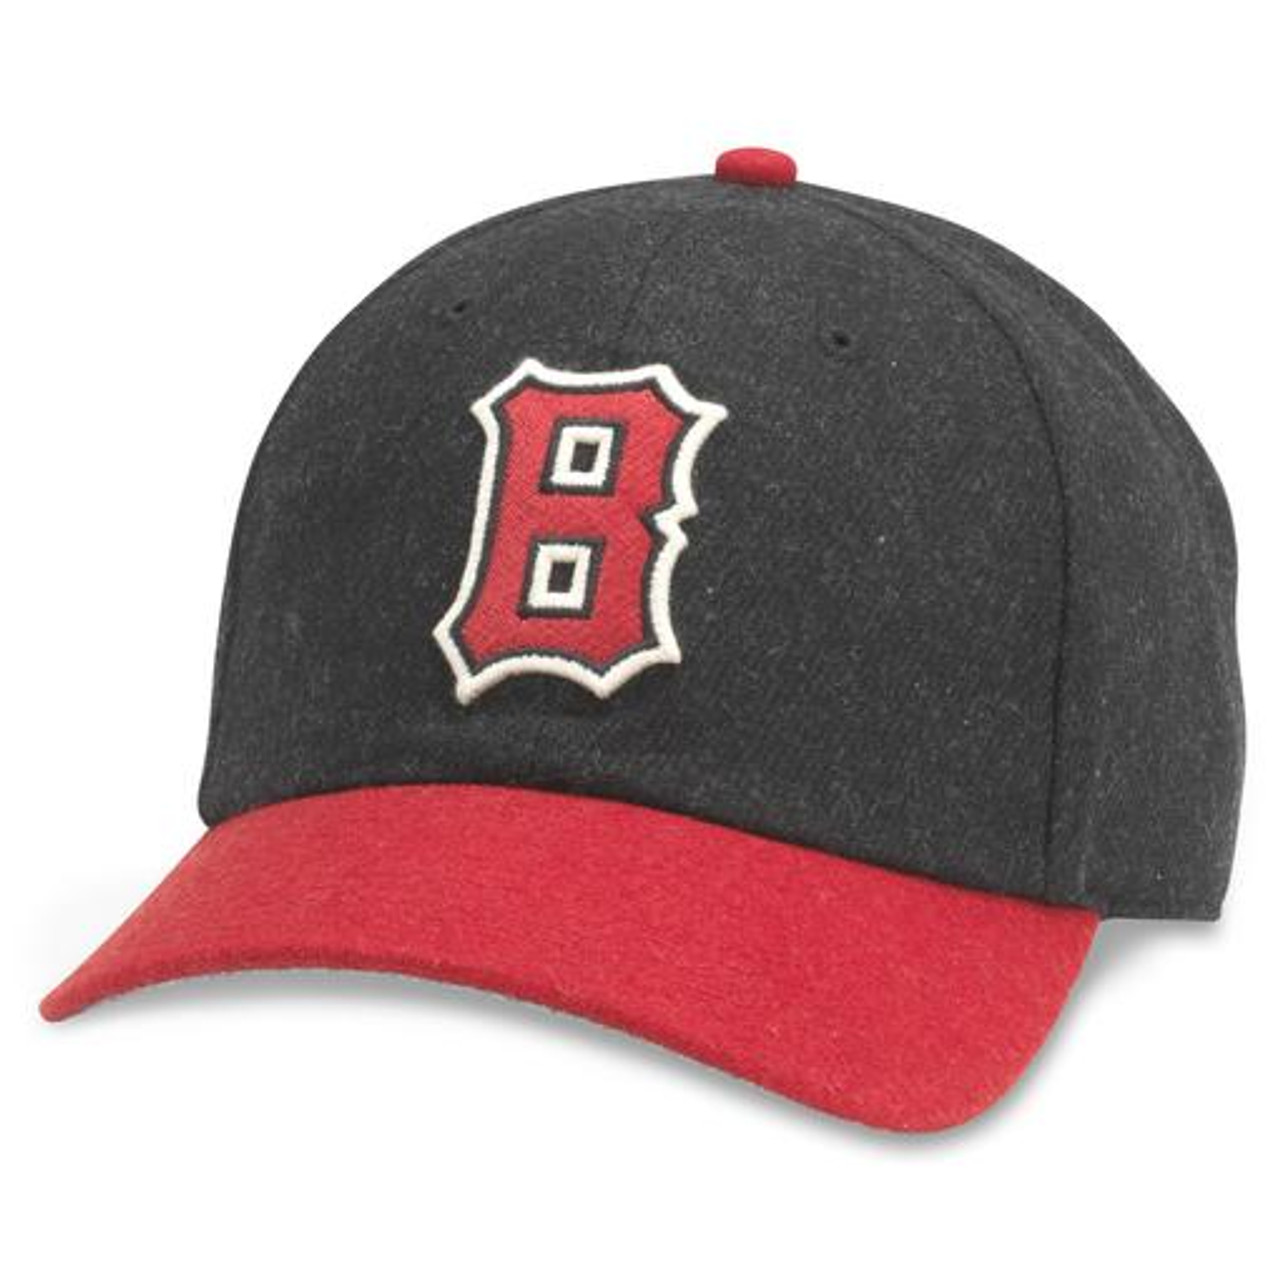 Oh Trading Company Negro League Detroit Stars Adult Red Fitted Cap Sz 7 3/8  NWT